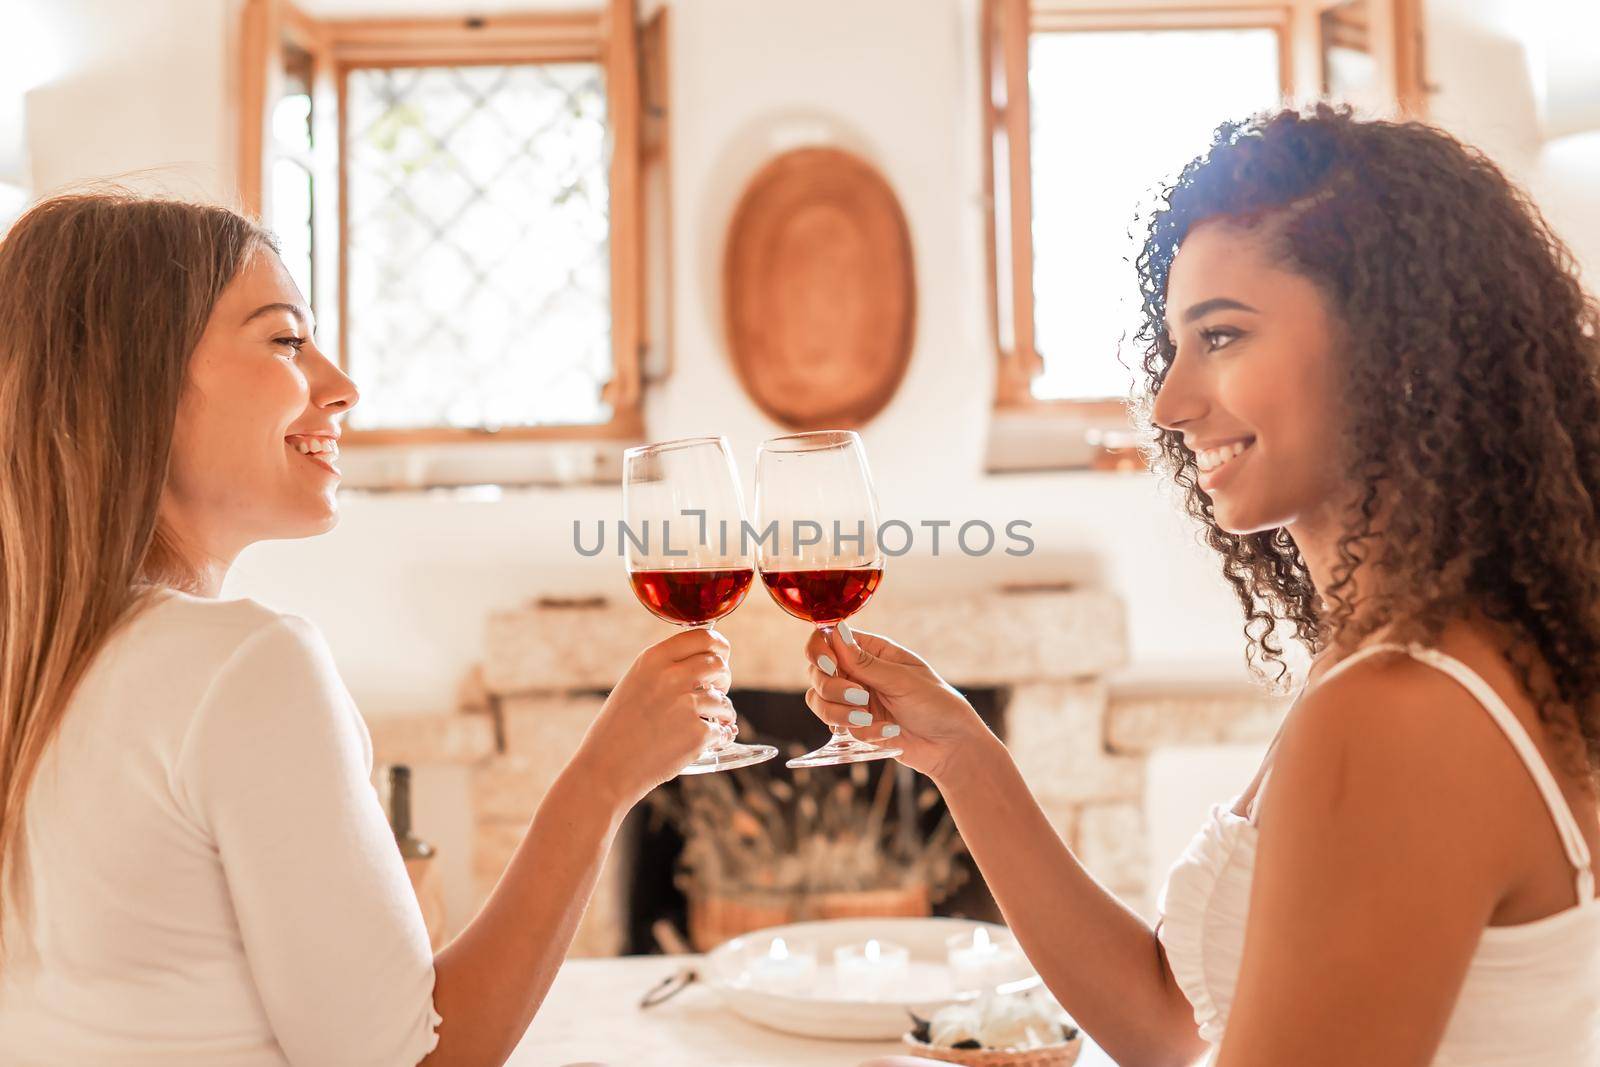 Charme, beauty and happiness: multiracial young women couple toasting with red wine looking in the eyes each other with bright sun entering the house through the open windows illuminating the room by robbyfontanesi